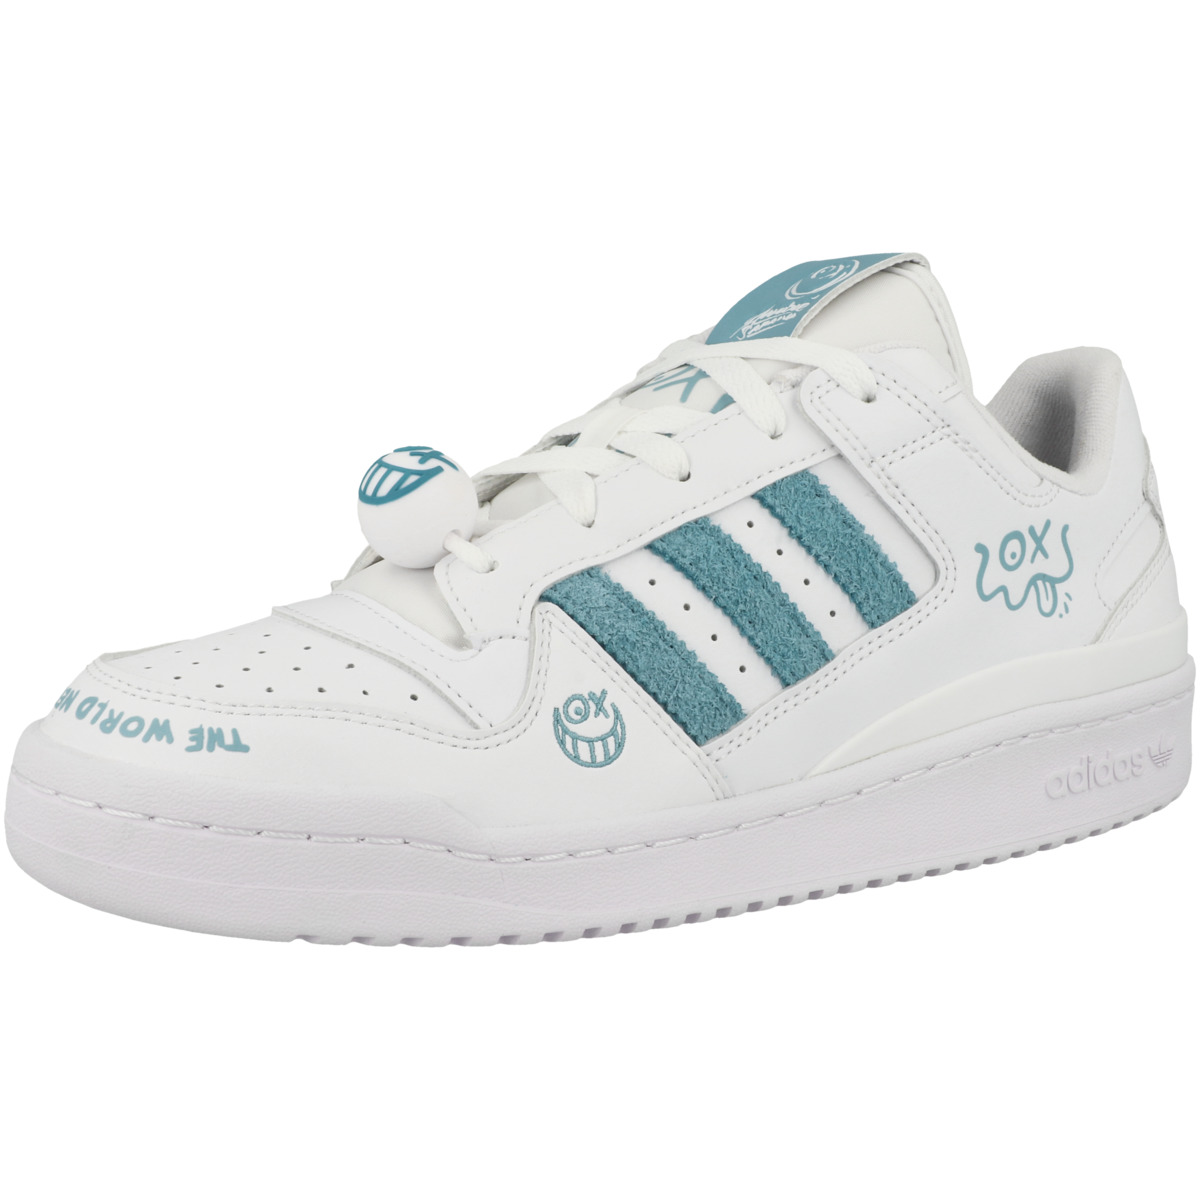 Adidas Forum Low Classic X André Saraiva Sneaker weiss